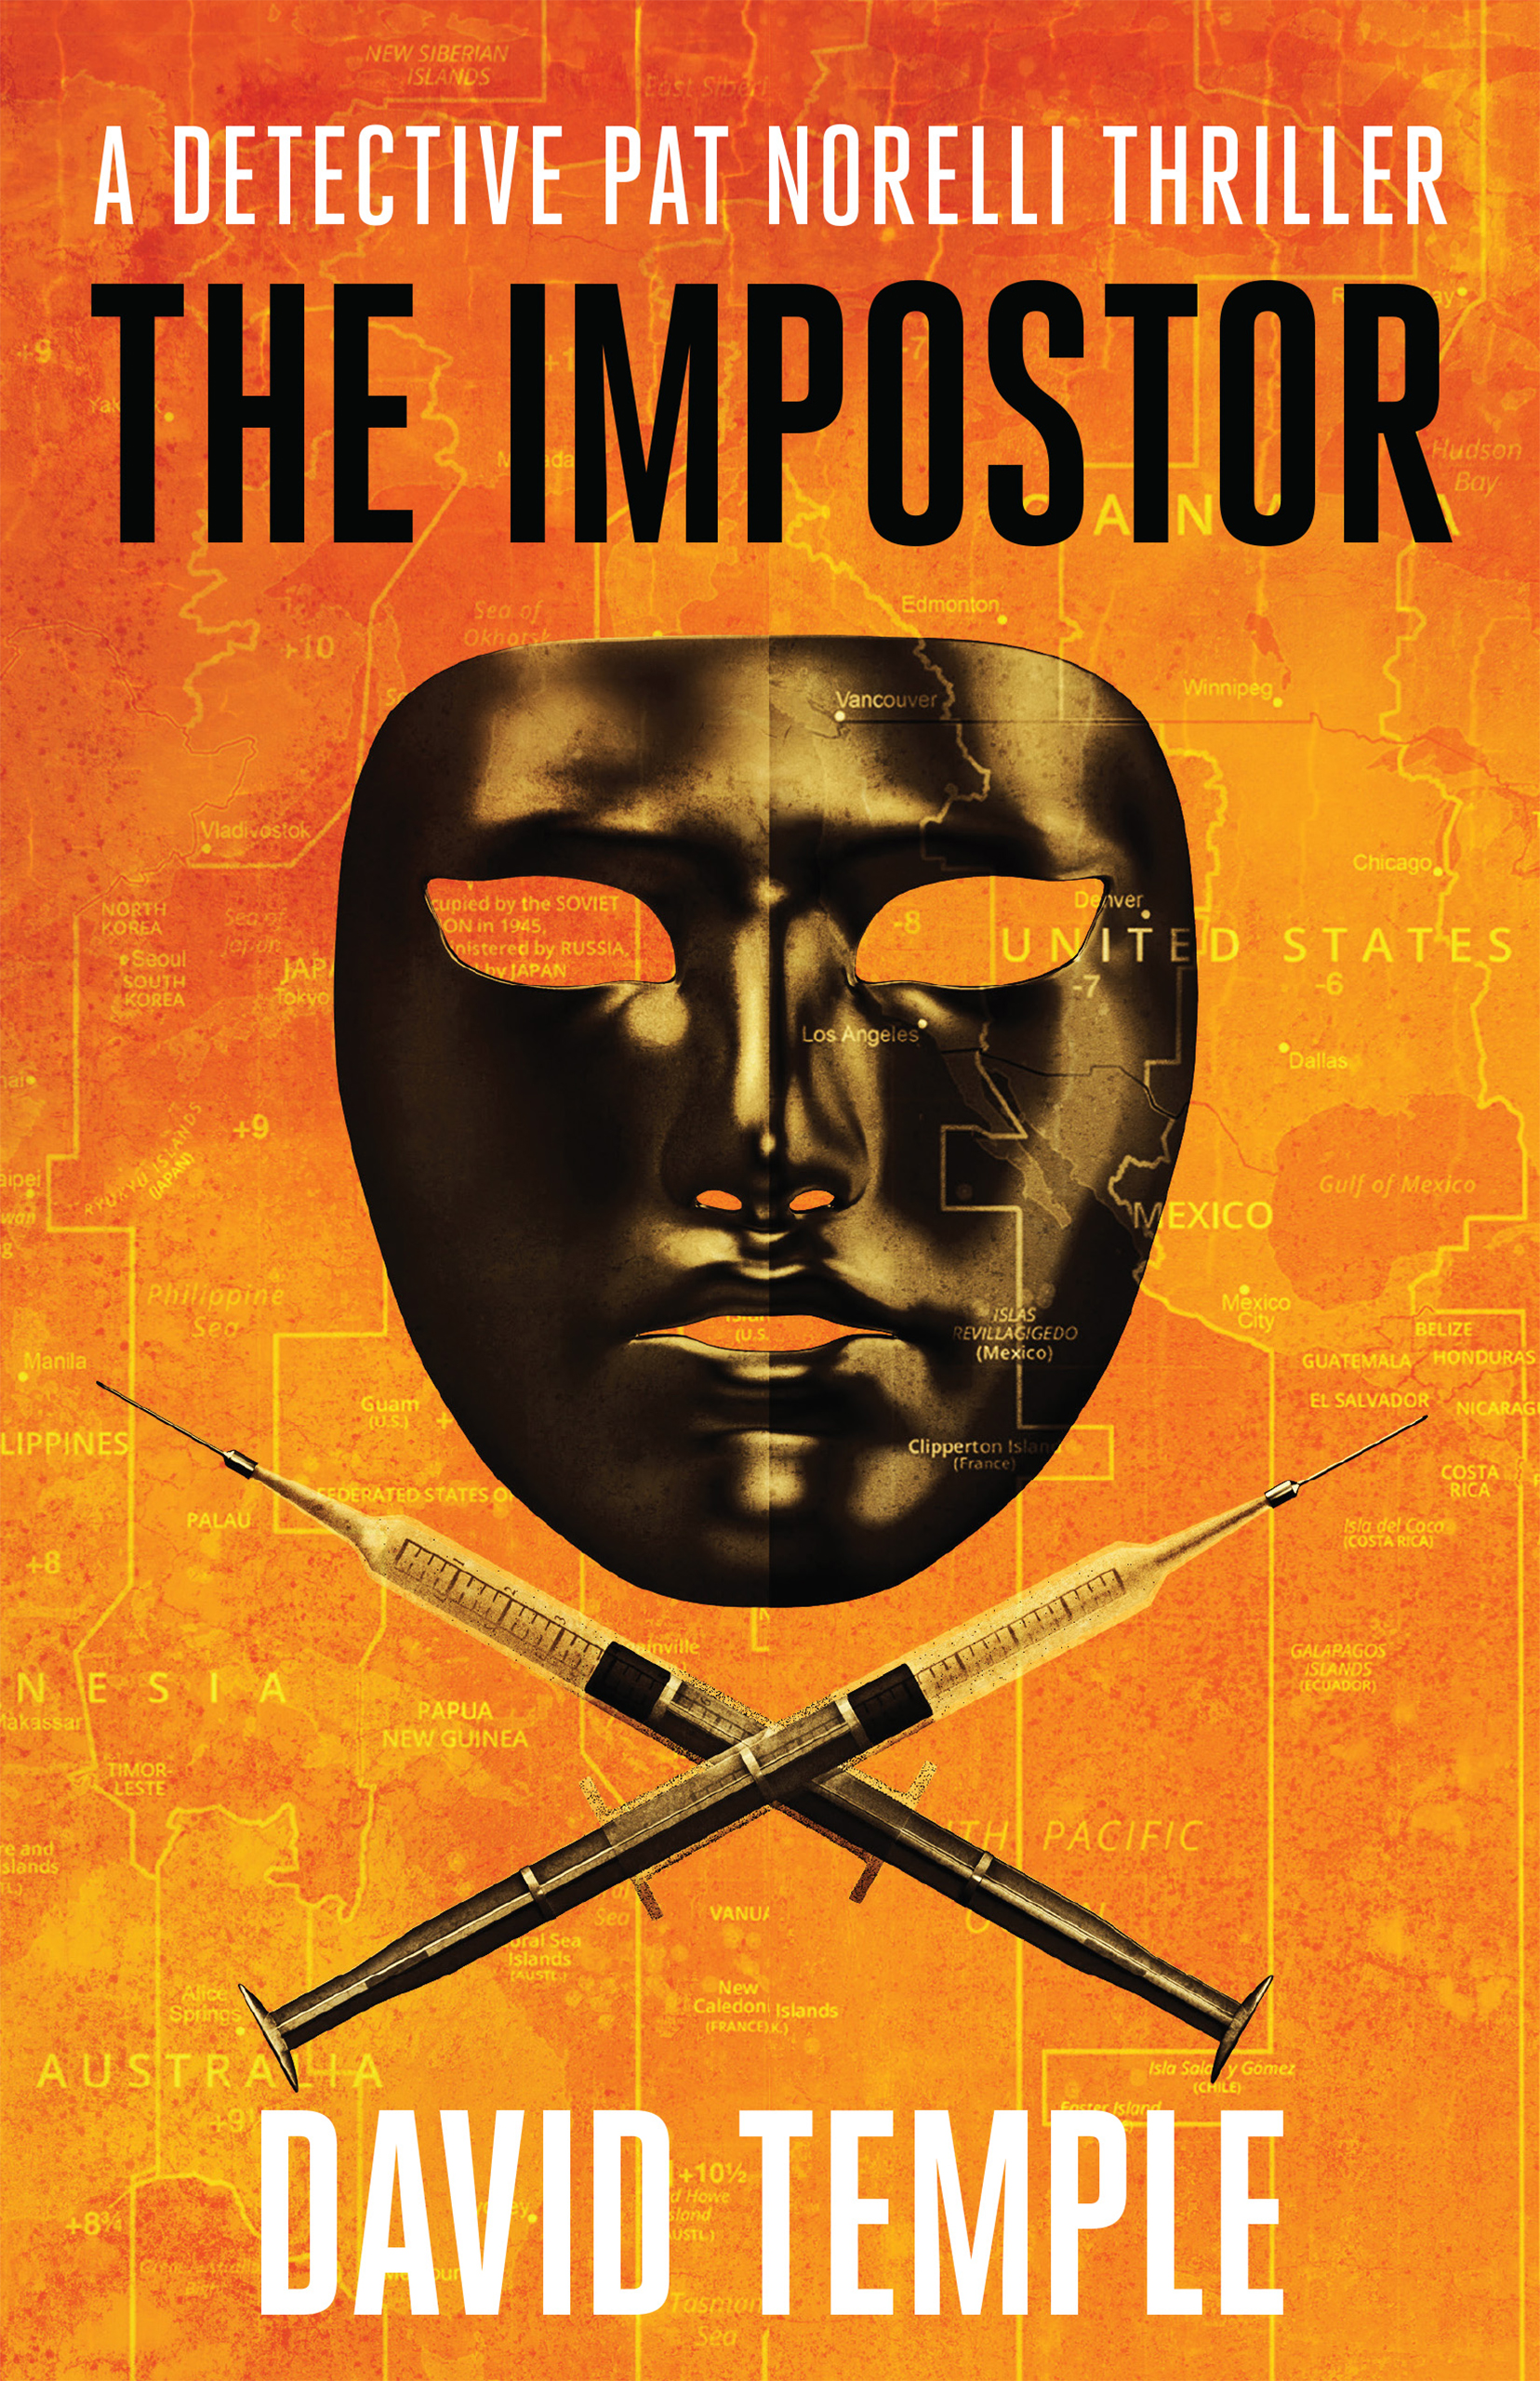 ***The_Impostor_cover-final copy